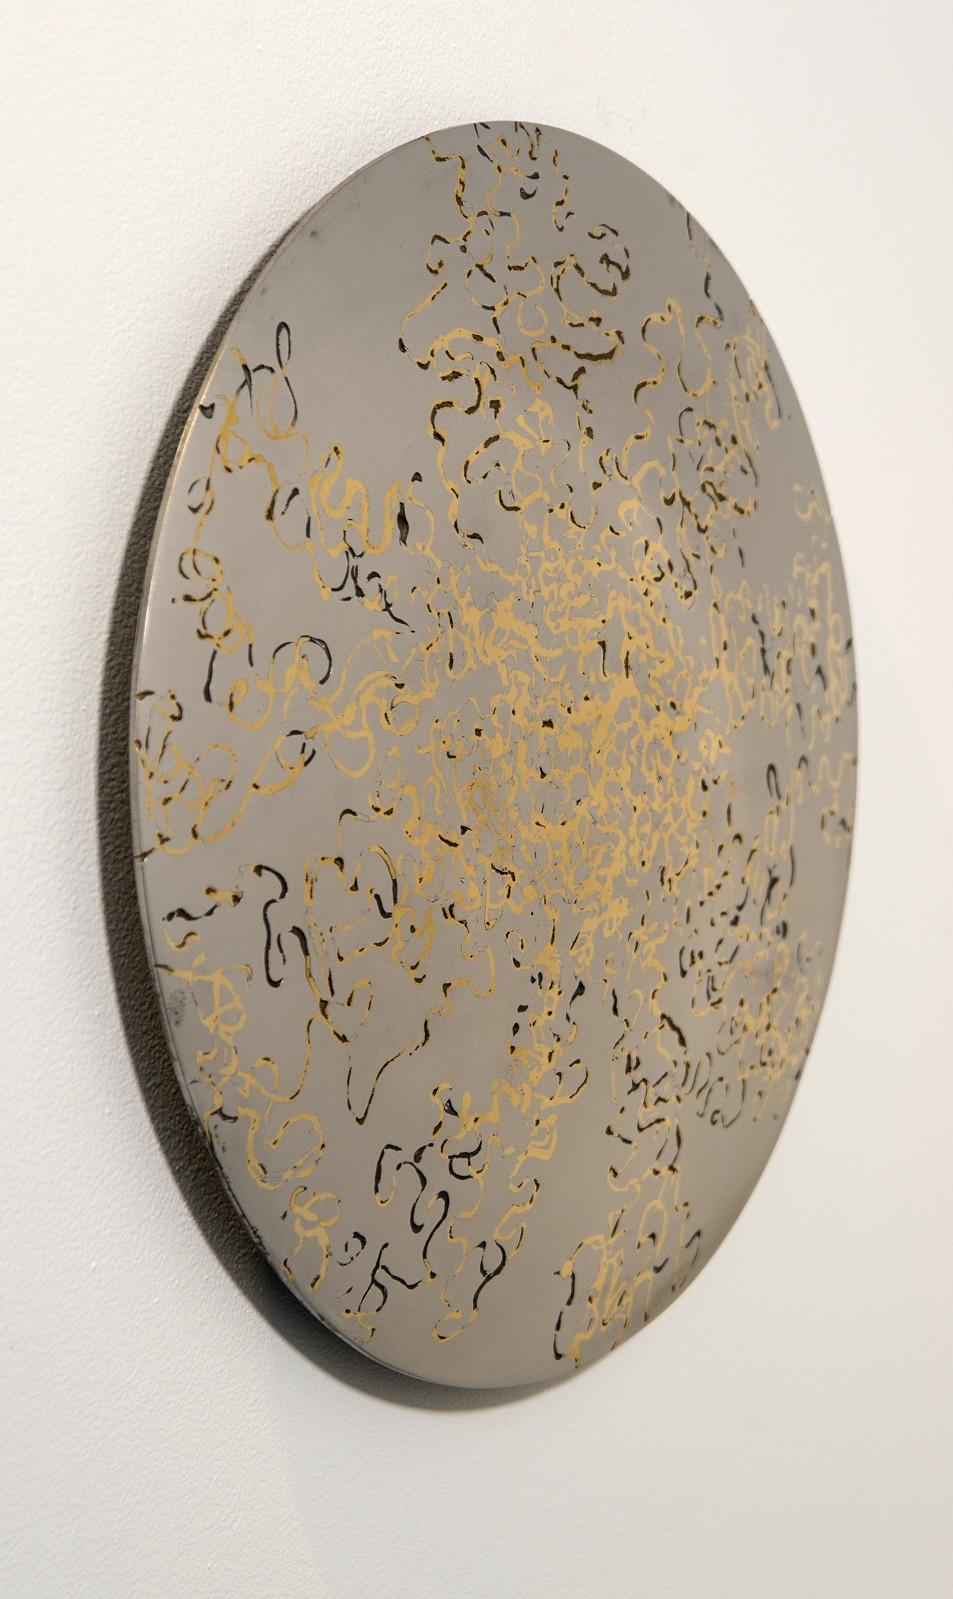 Reflecting Nature Series No 1 - polished stainless steel, copper, wall sculpture - Gold Abstract Sculpture by Shayne Dark